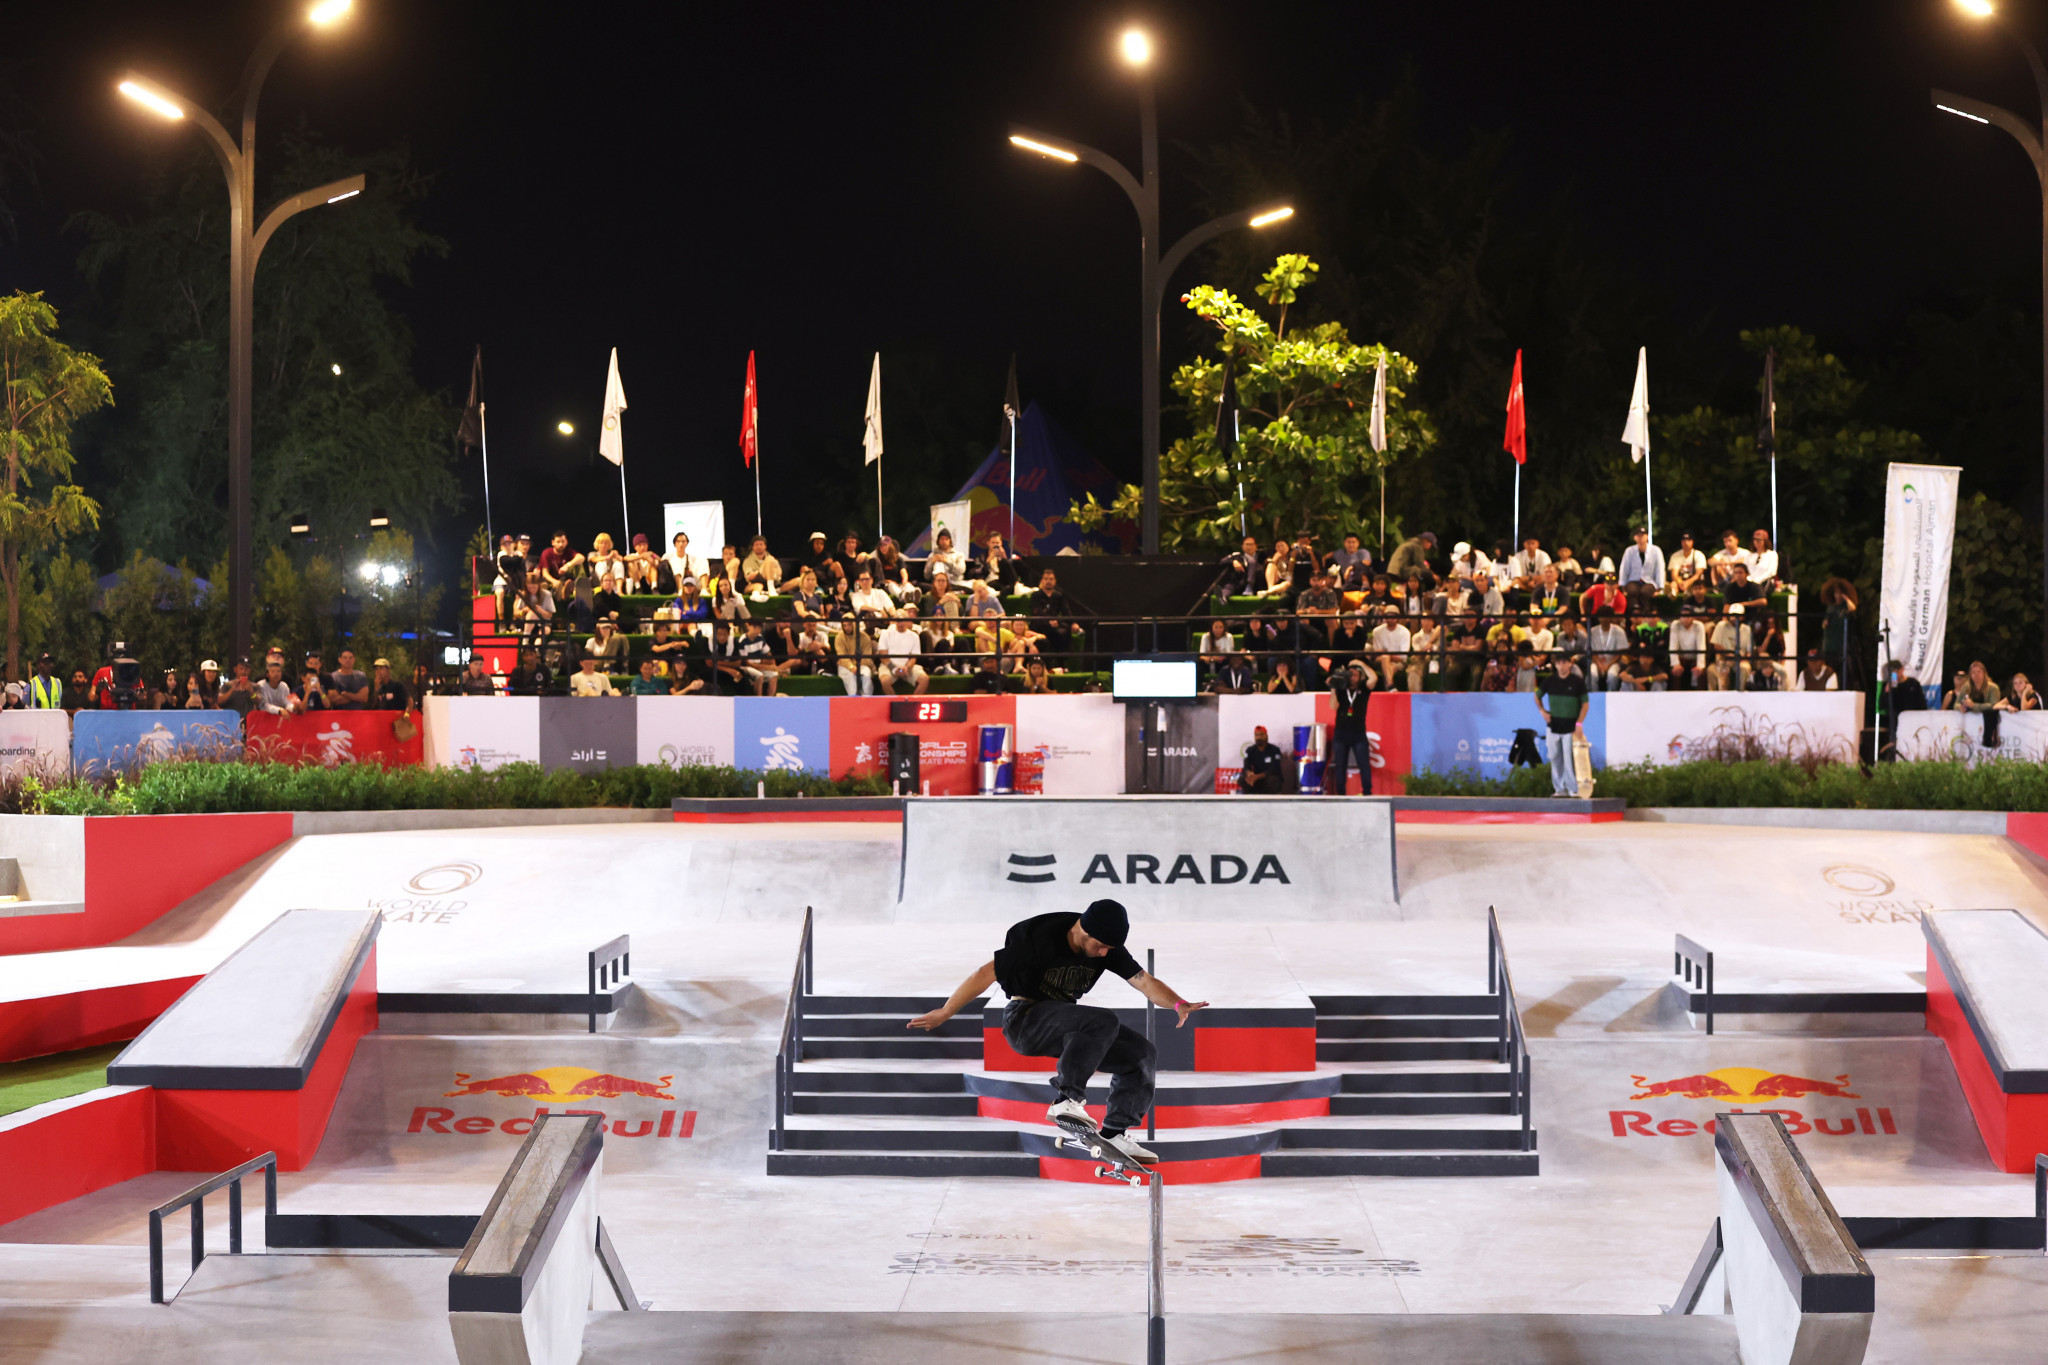 Sharjah in the UAE staged a Street and Park World Championships earlier this year ©Getty Images